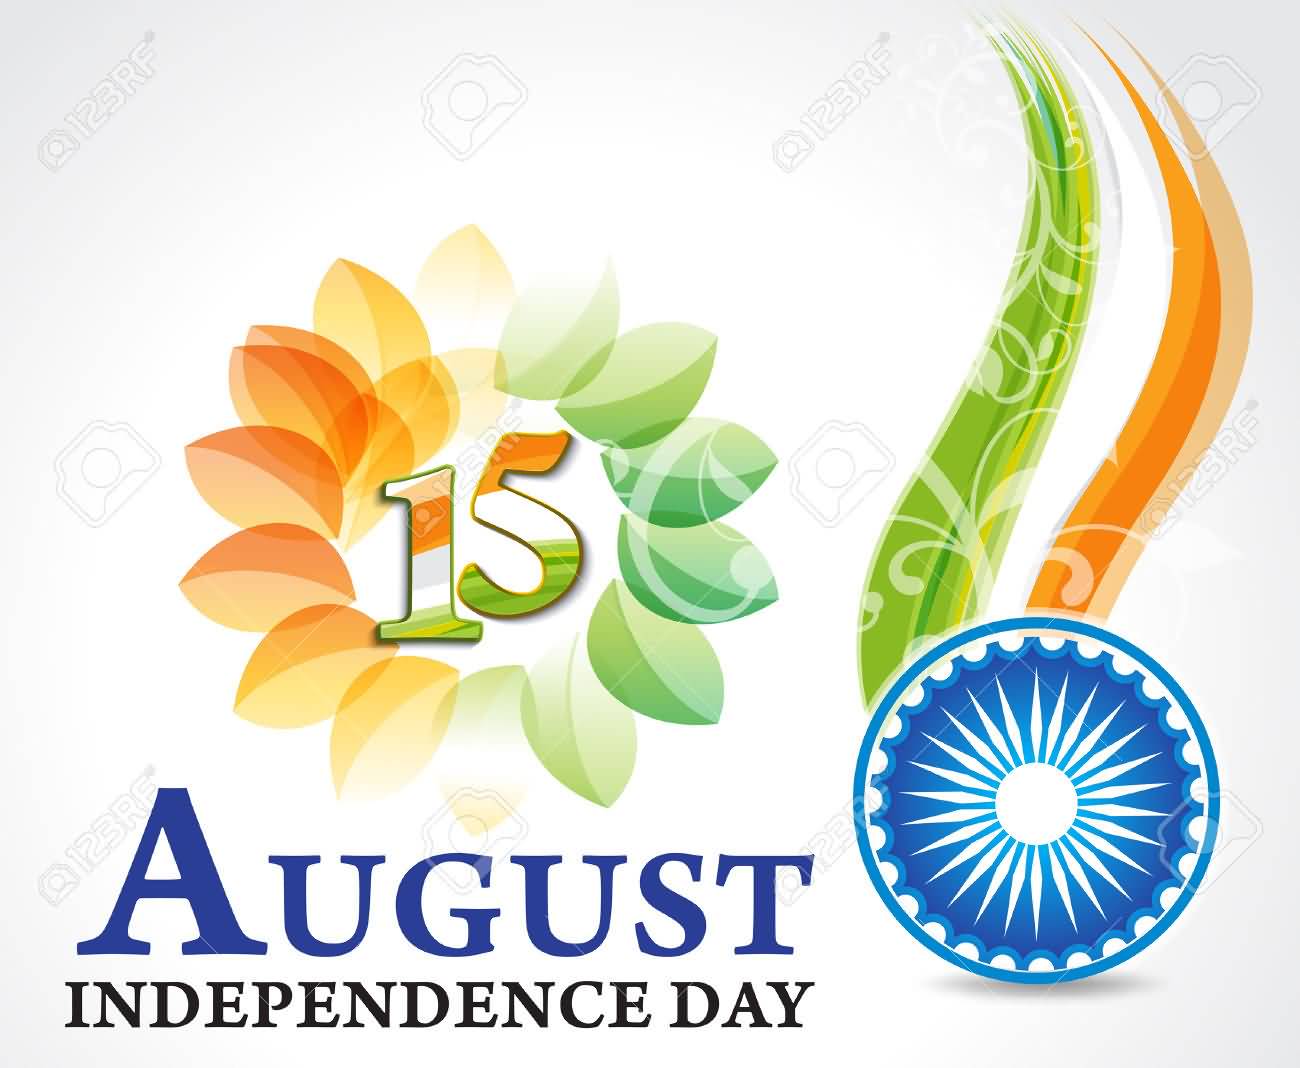 15 August Independence Day Tri Color Flowers And Ashok Chakra Vector Image